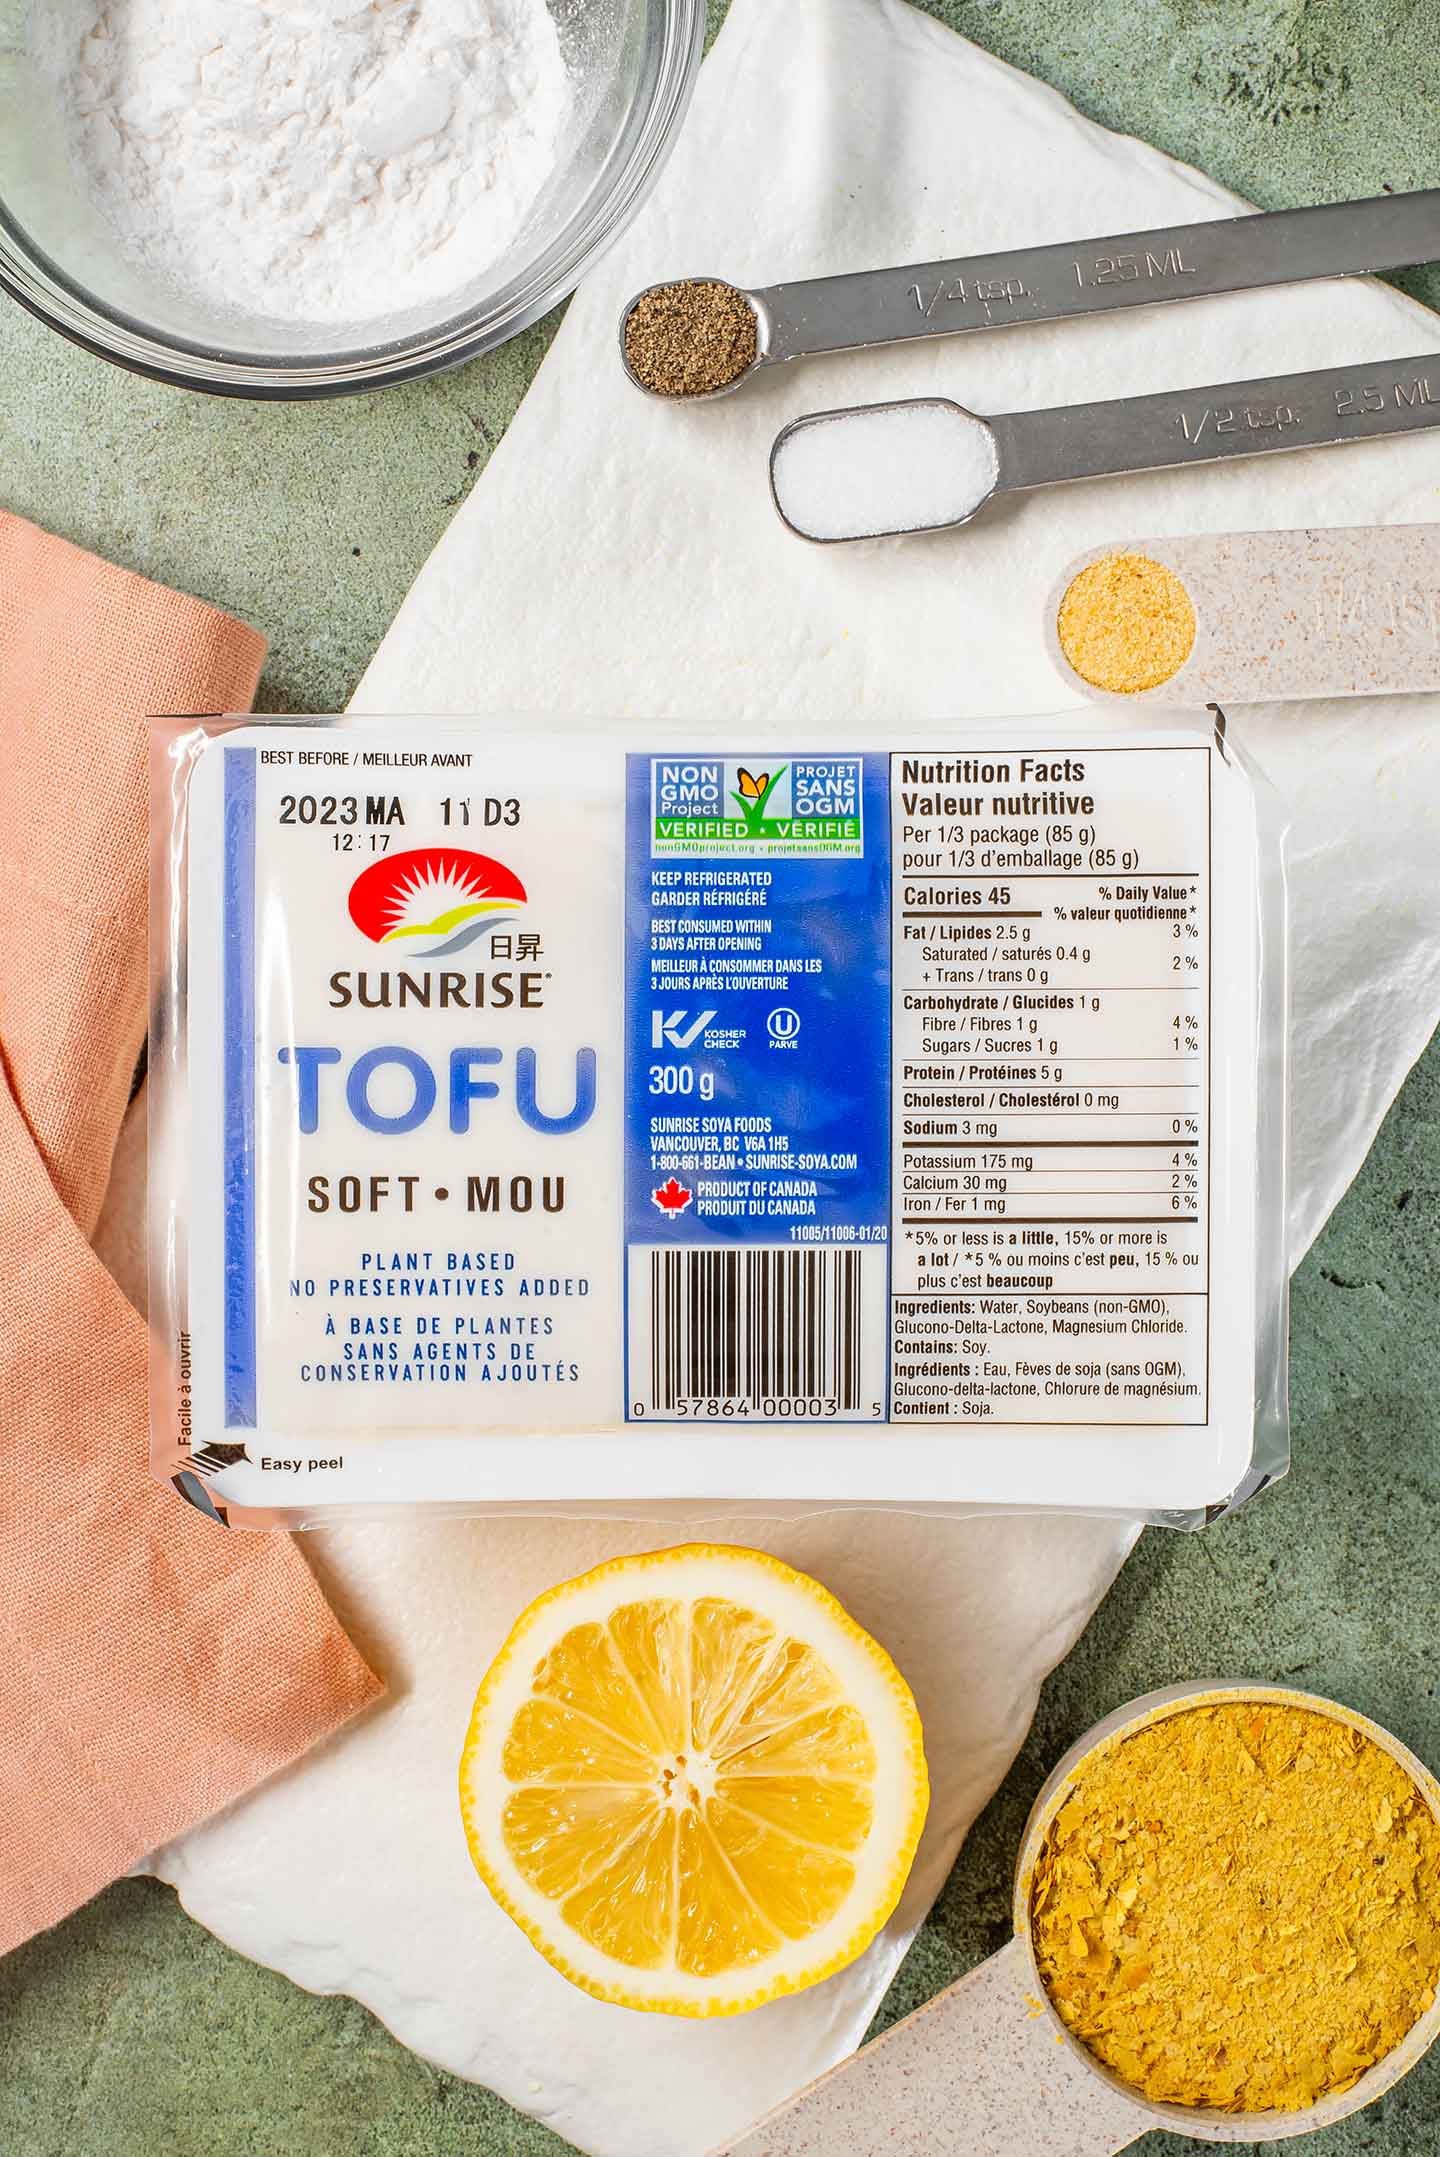 A package of silken or soft tofu is surrounded by a cut lemon, tapioca starch, and seasonings.